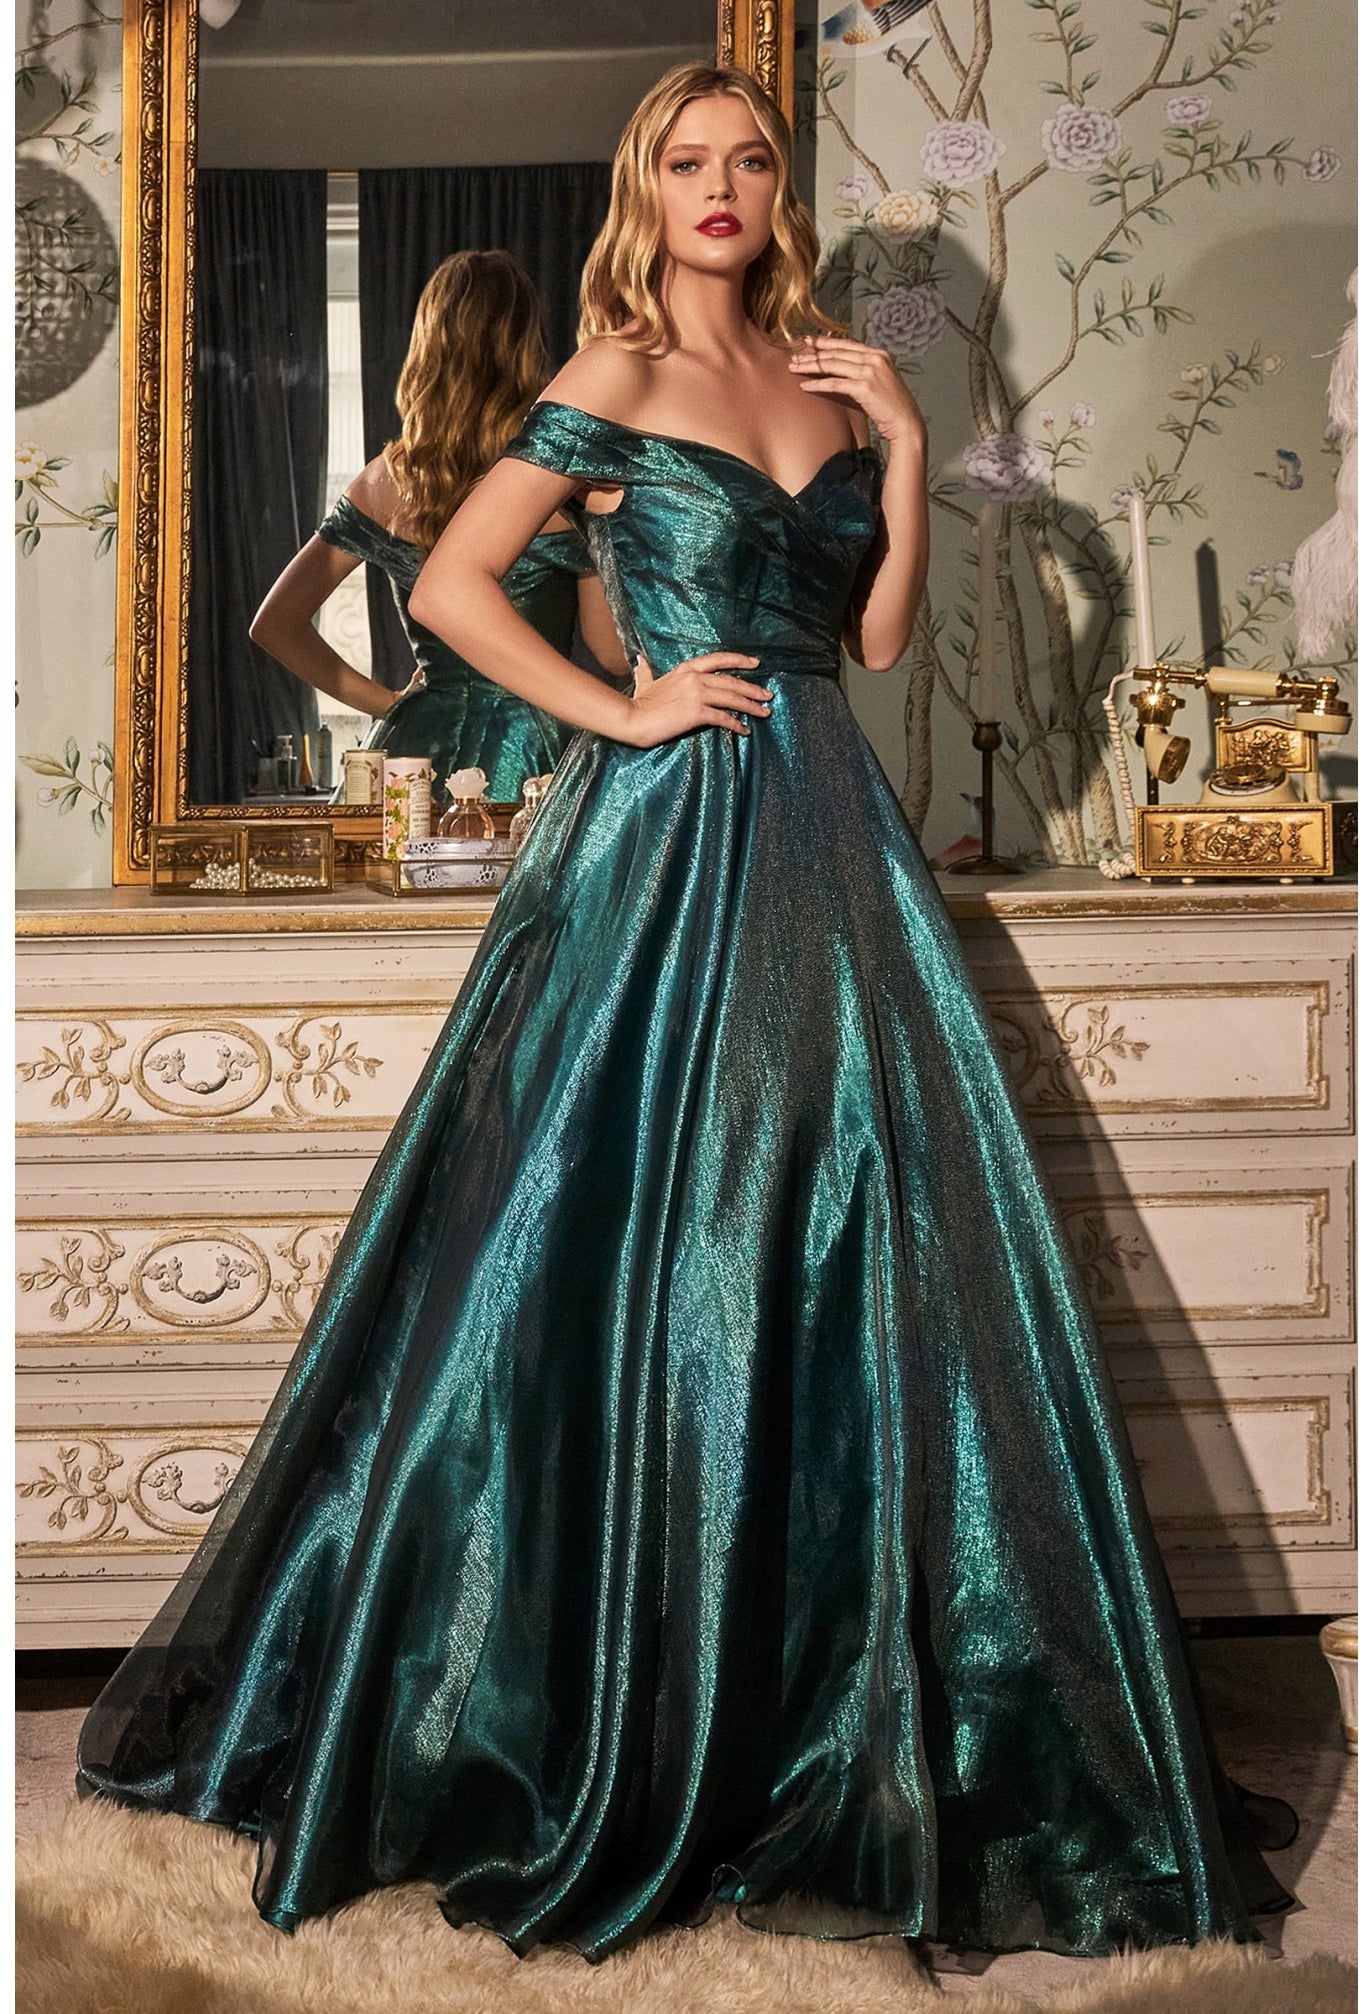 CD 822 Size 20 Emerald Ballgown off the Shoulder Formal Pageant Dress Prom Gown This modern ball gown delivers simple sophistication. With an off the shoulder neckline the sweetheart cut has a fitted pleated bodice and full layered skirt. The metallic organza fabrication captures light illuminating the dress.  Size: 20  Color: Emerald